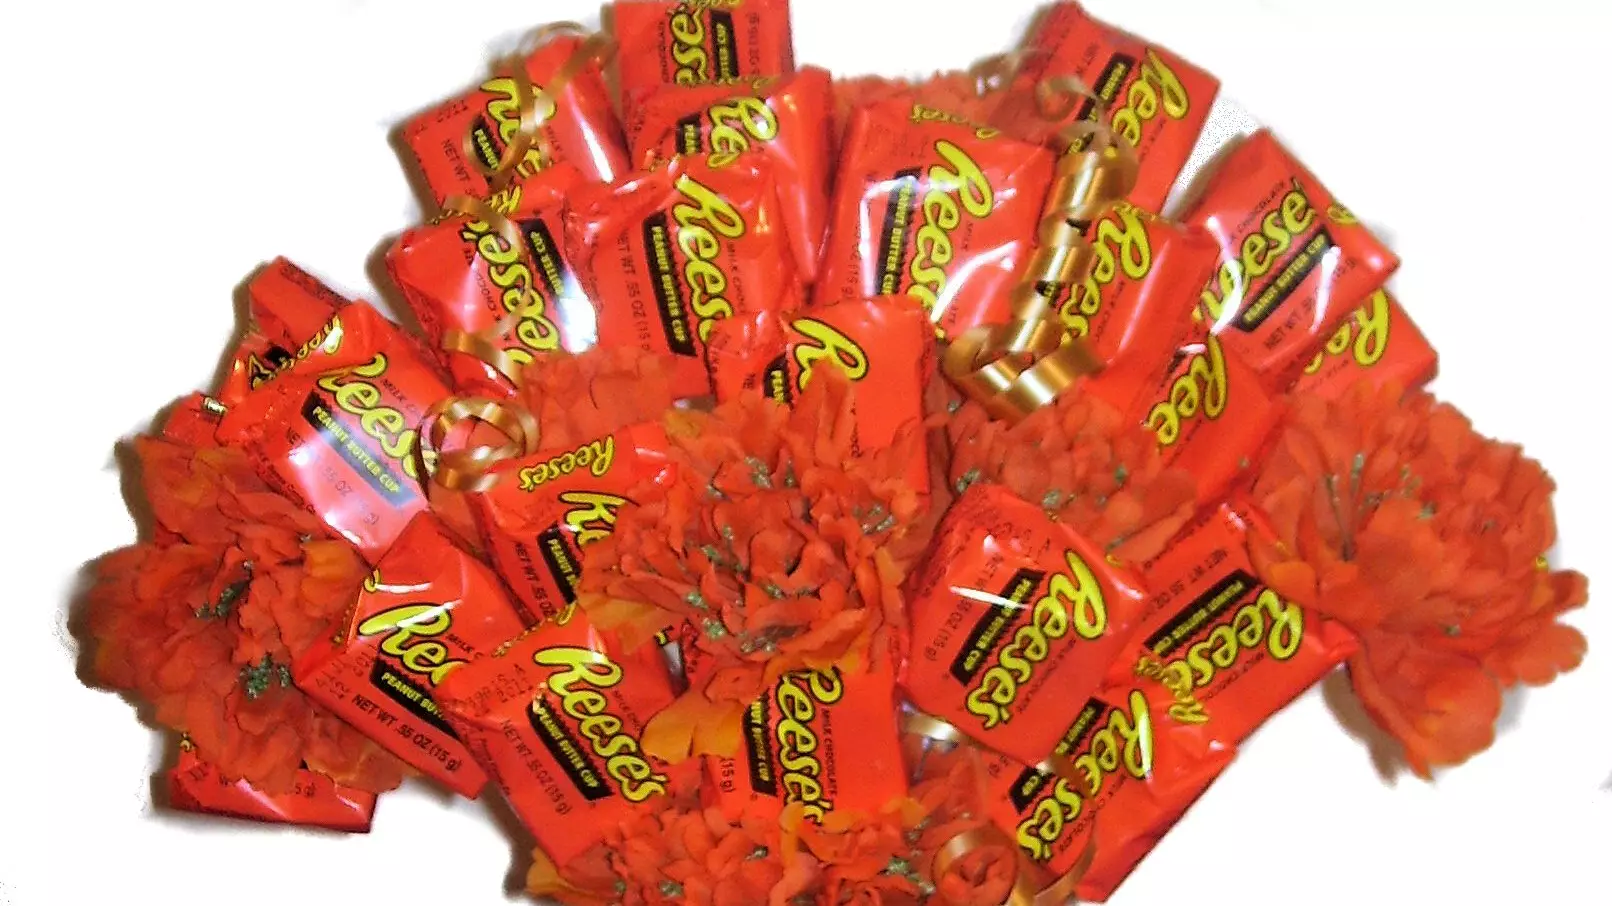 You Can Buy A Bouquet Of Reese's Peanut Butter Cups For Valentine's Day